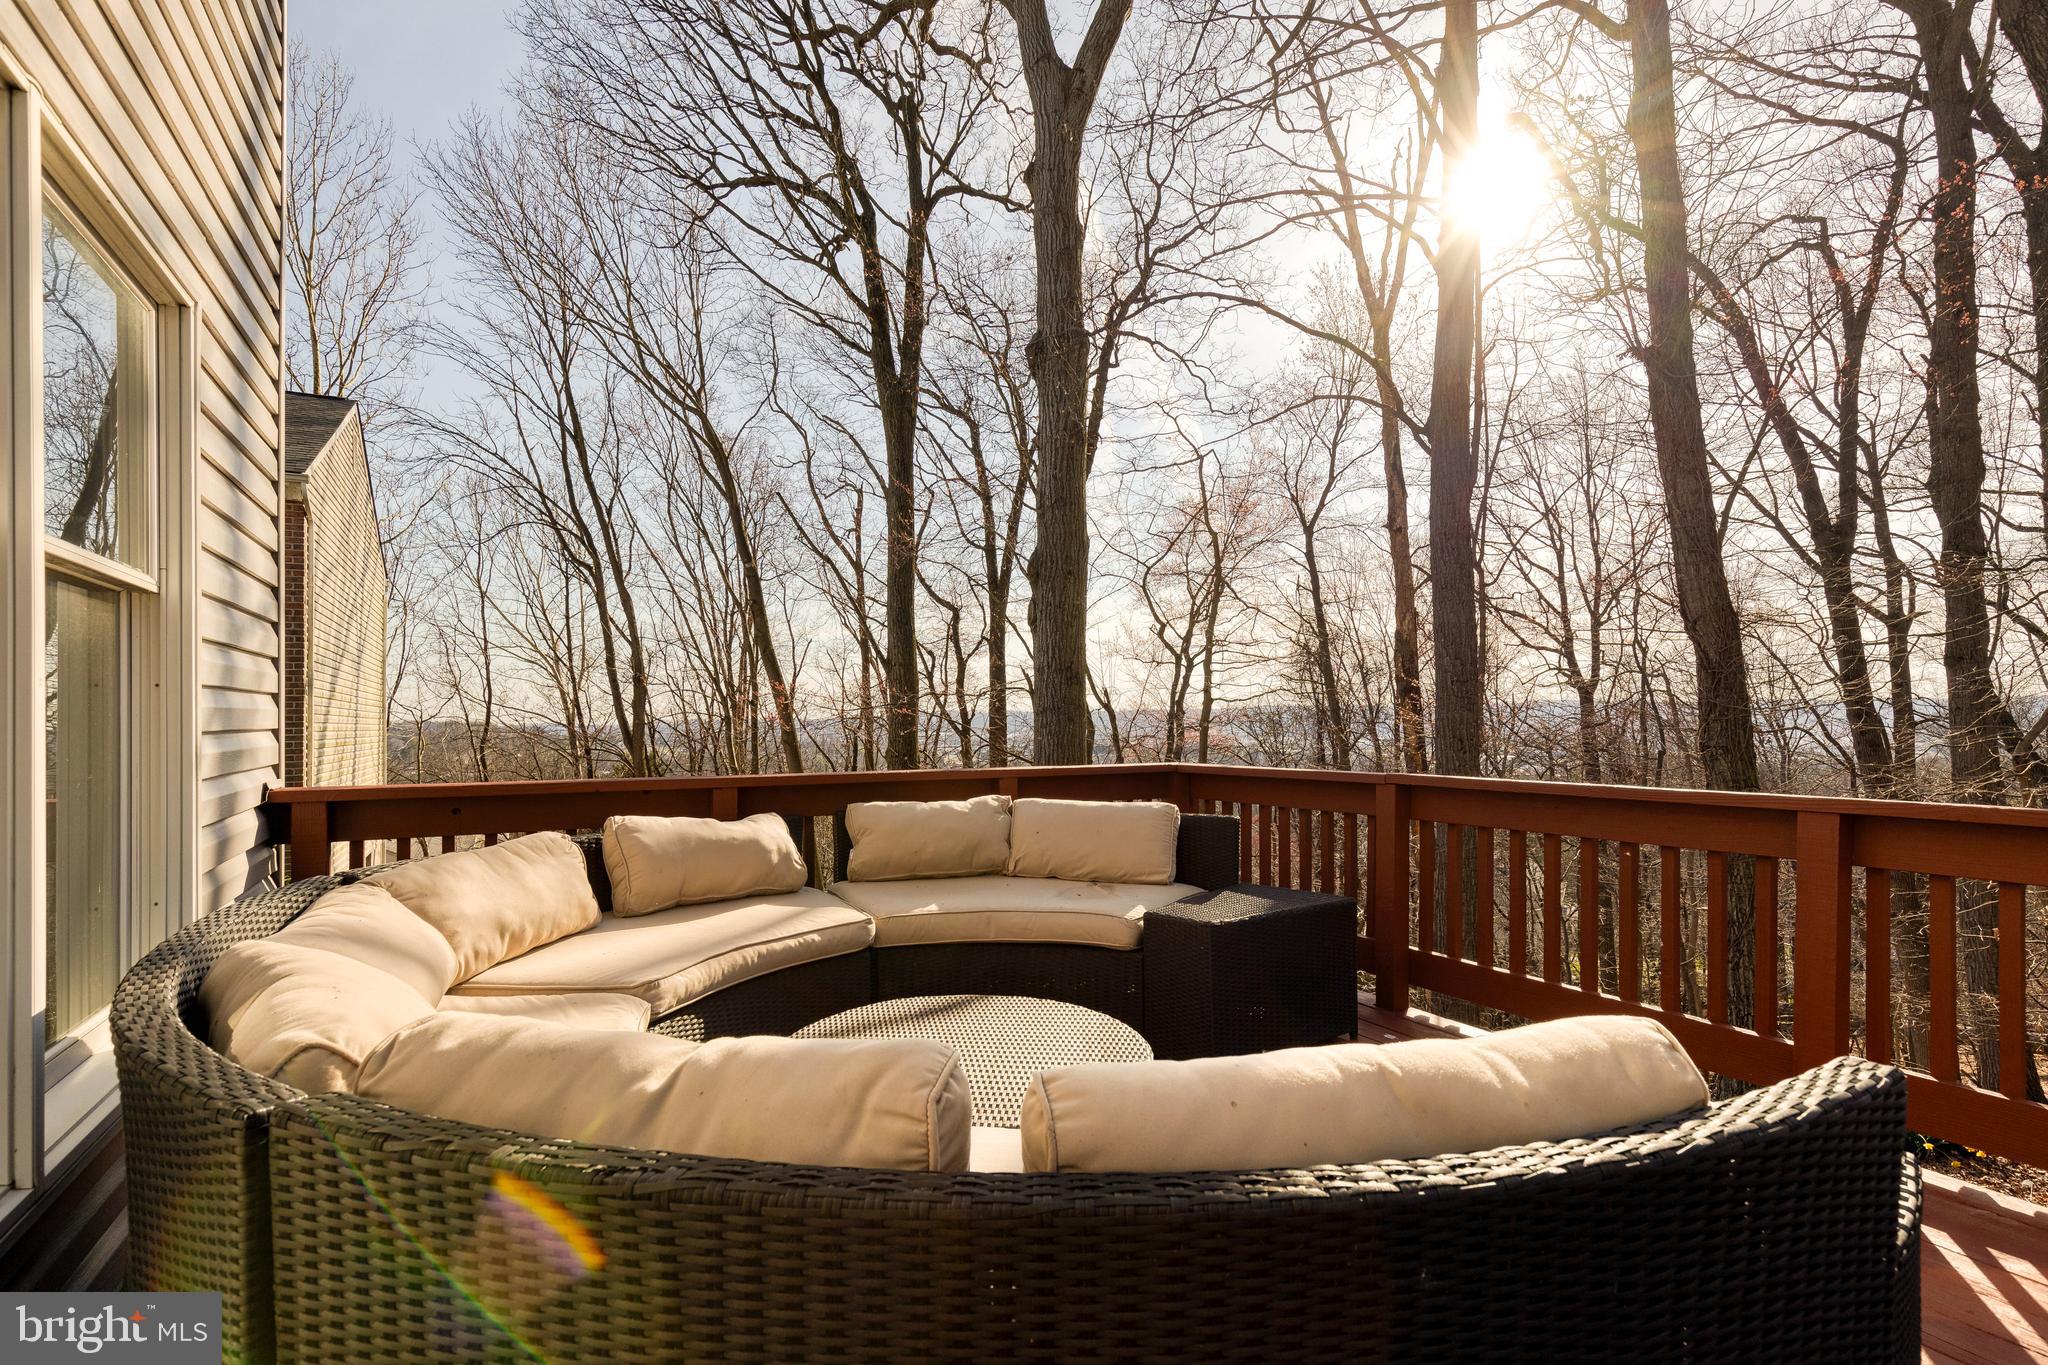 a roof deck with couches and wooden fence